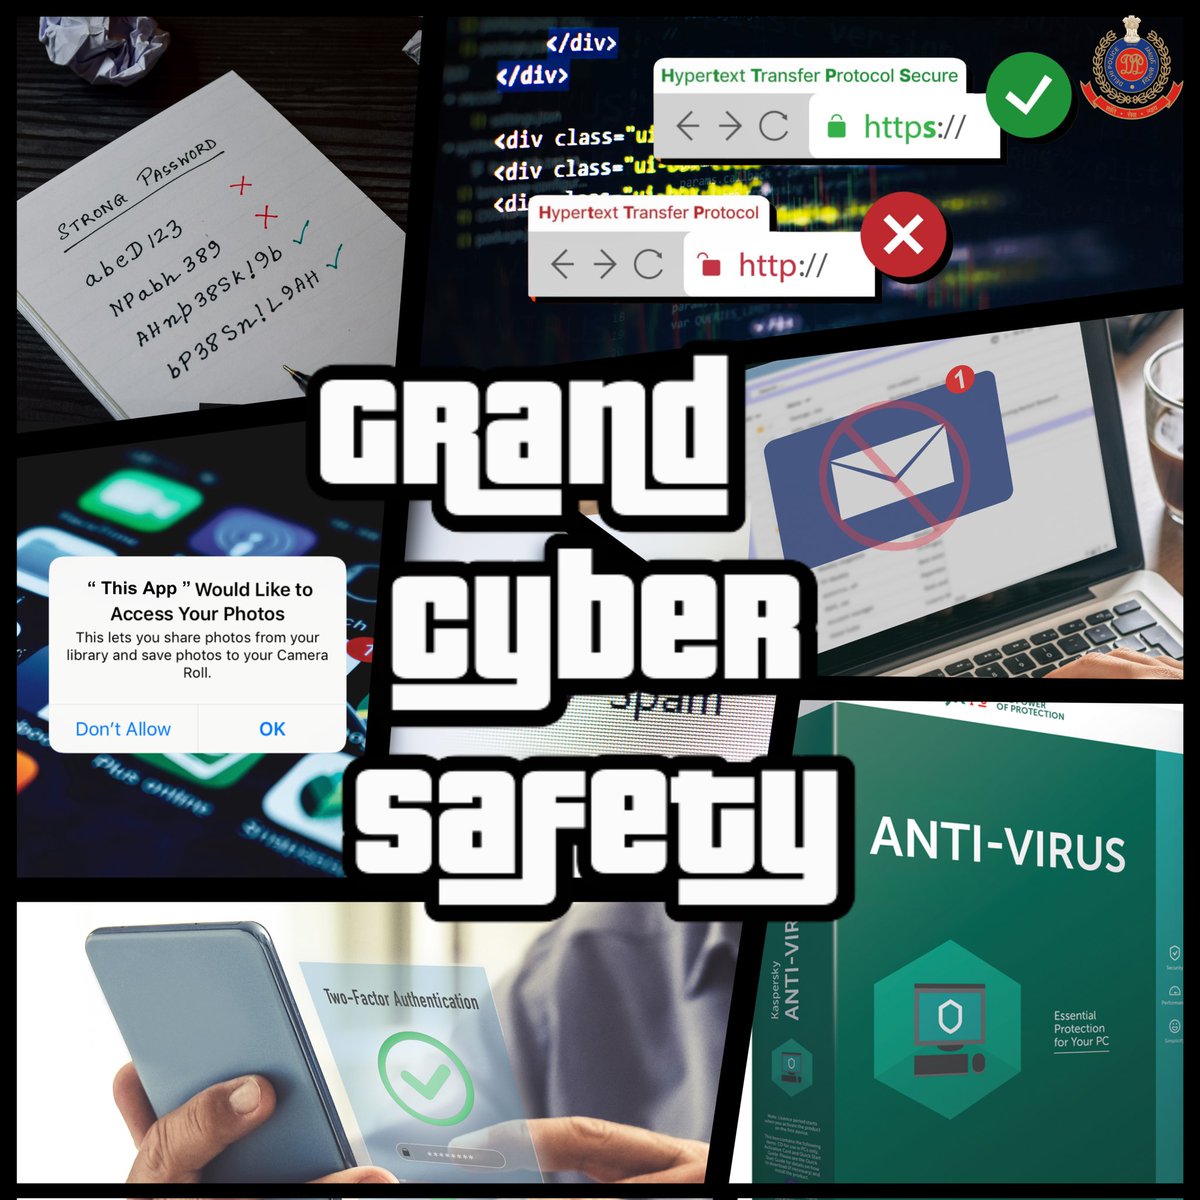 Stay safe in the online world and keep your game on point while waiting for GTA 6 🎮🔒.

#CyberSafeCitizen
#DelhiPoliceCares
#gta6